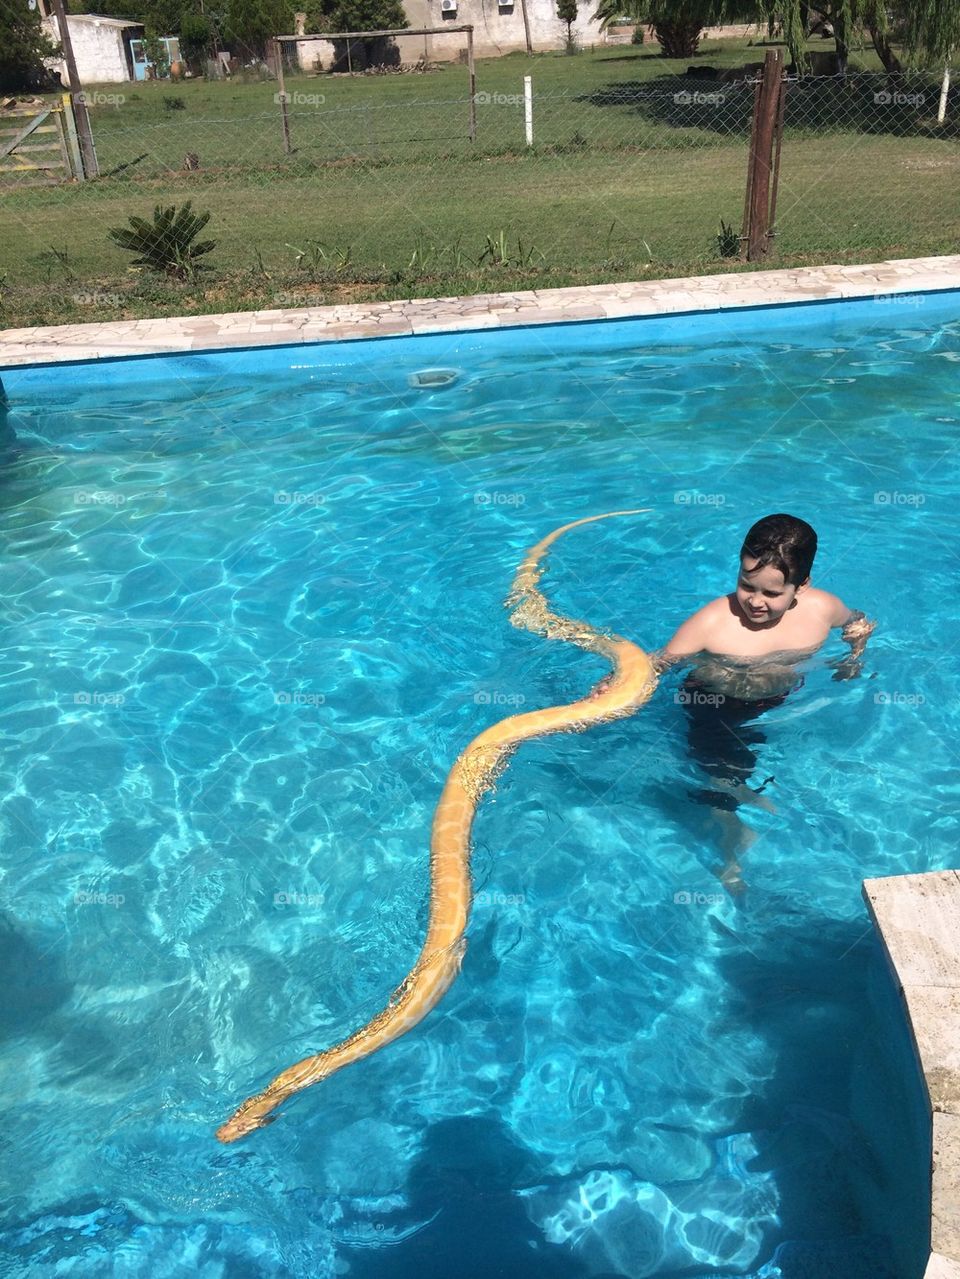 Bathing with a snake